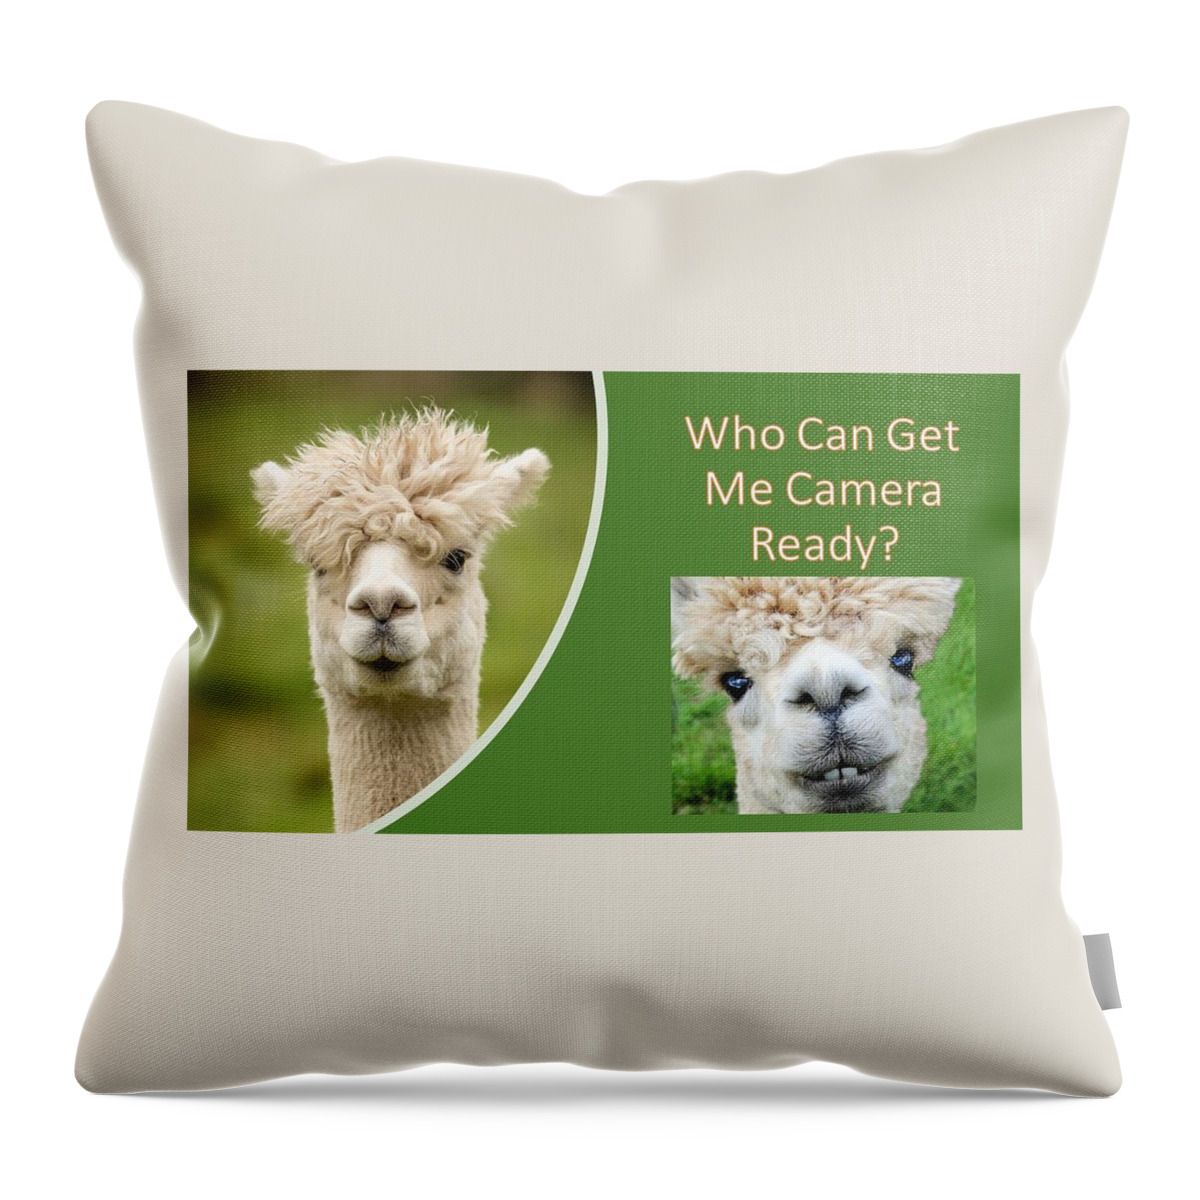 Alpaca Throw Pillow featuring the photograph Who Can Get Me Camera Ready by Nancy Ayanna Wyatt